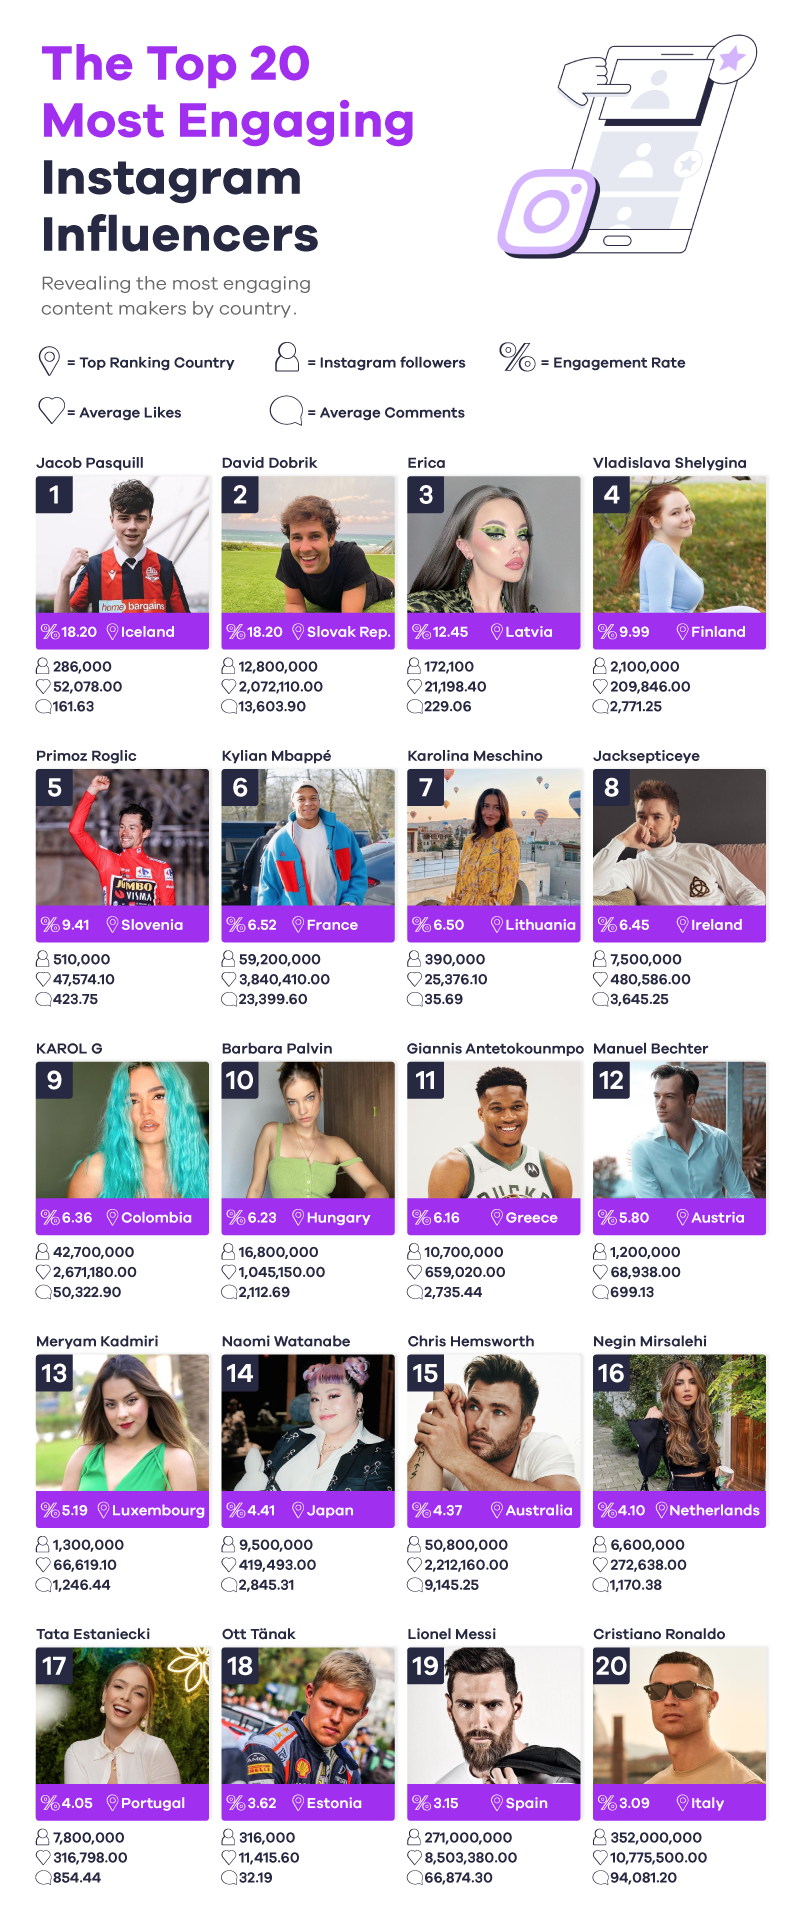 The top 20 most engaging Instagram Influencers